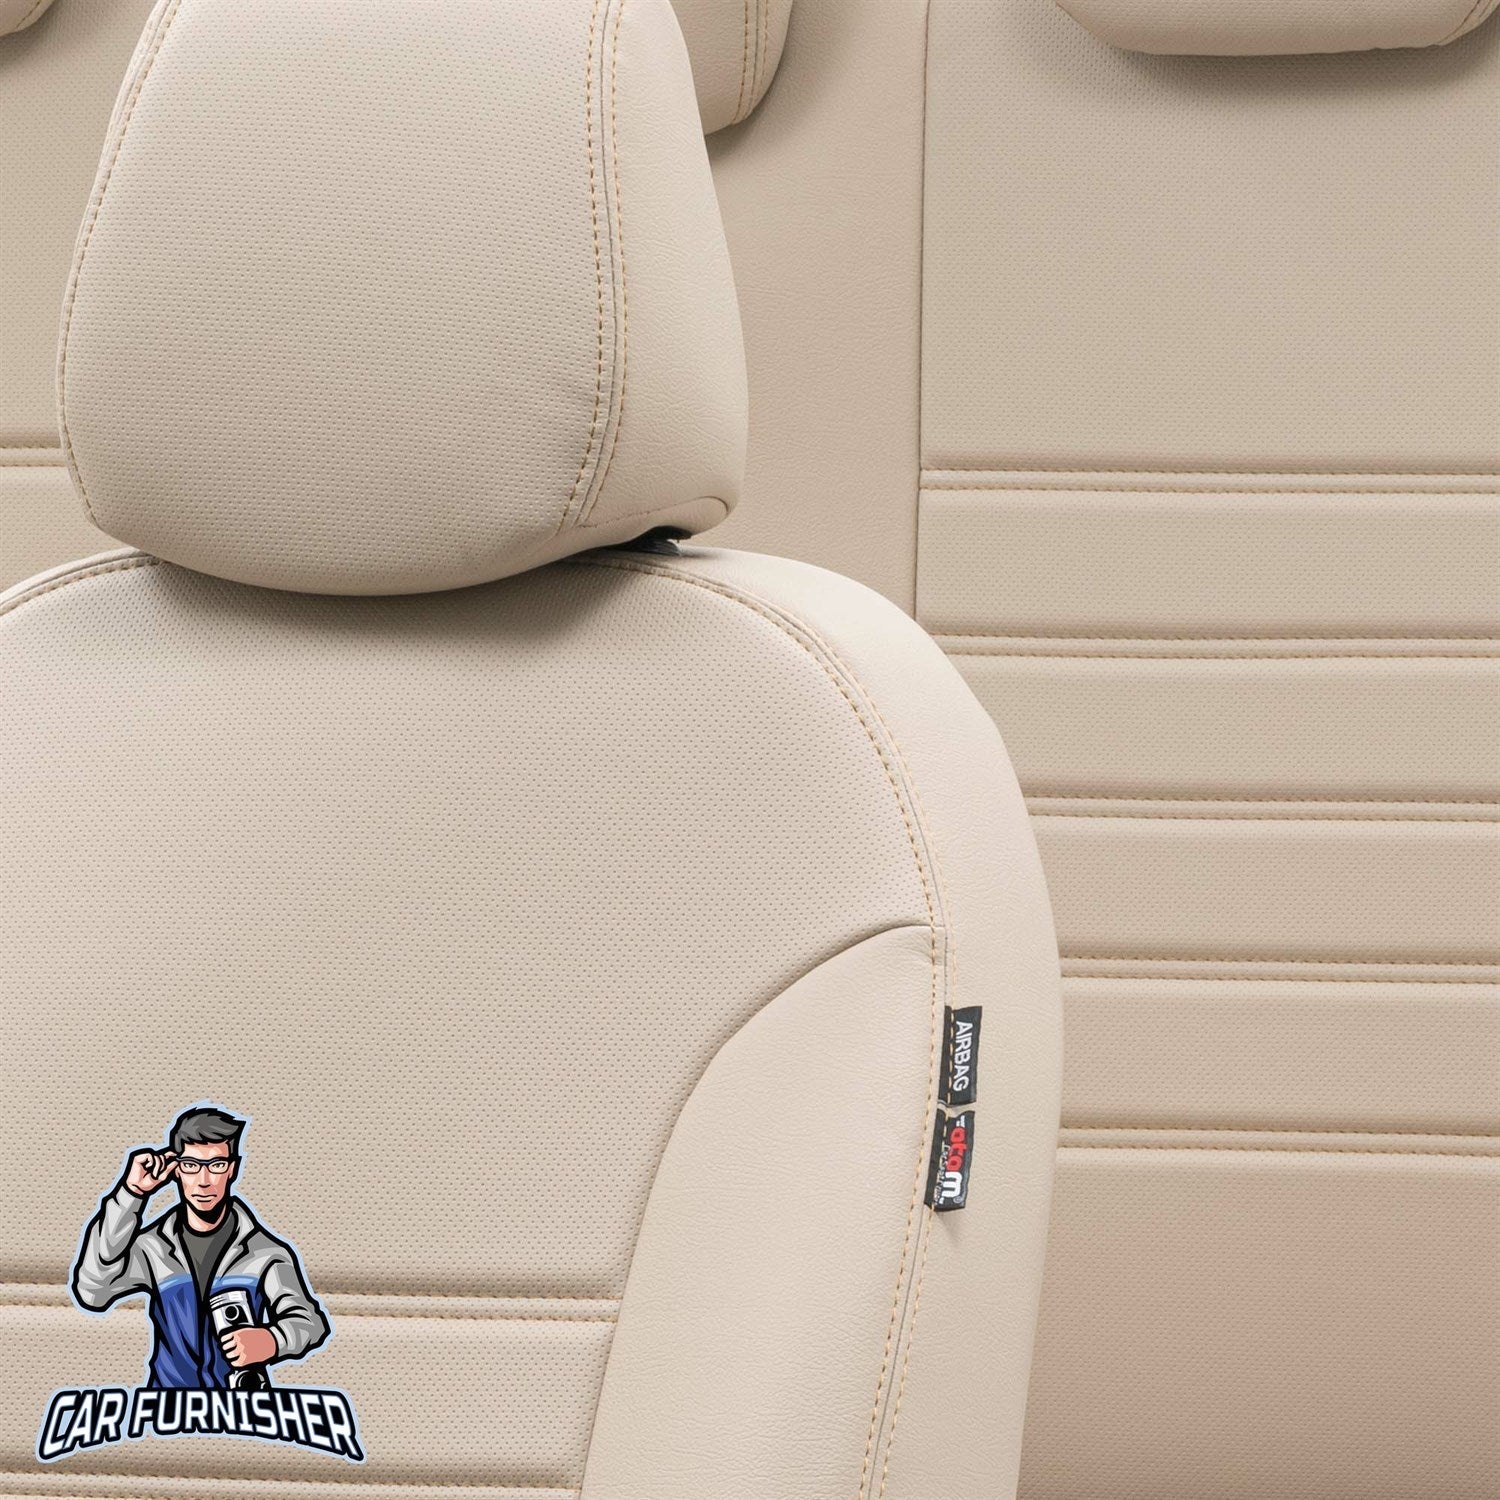 Daihatsu Terios Seat Covers Istanbul Leather Design Beige Leather